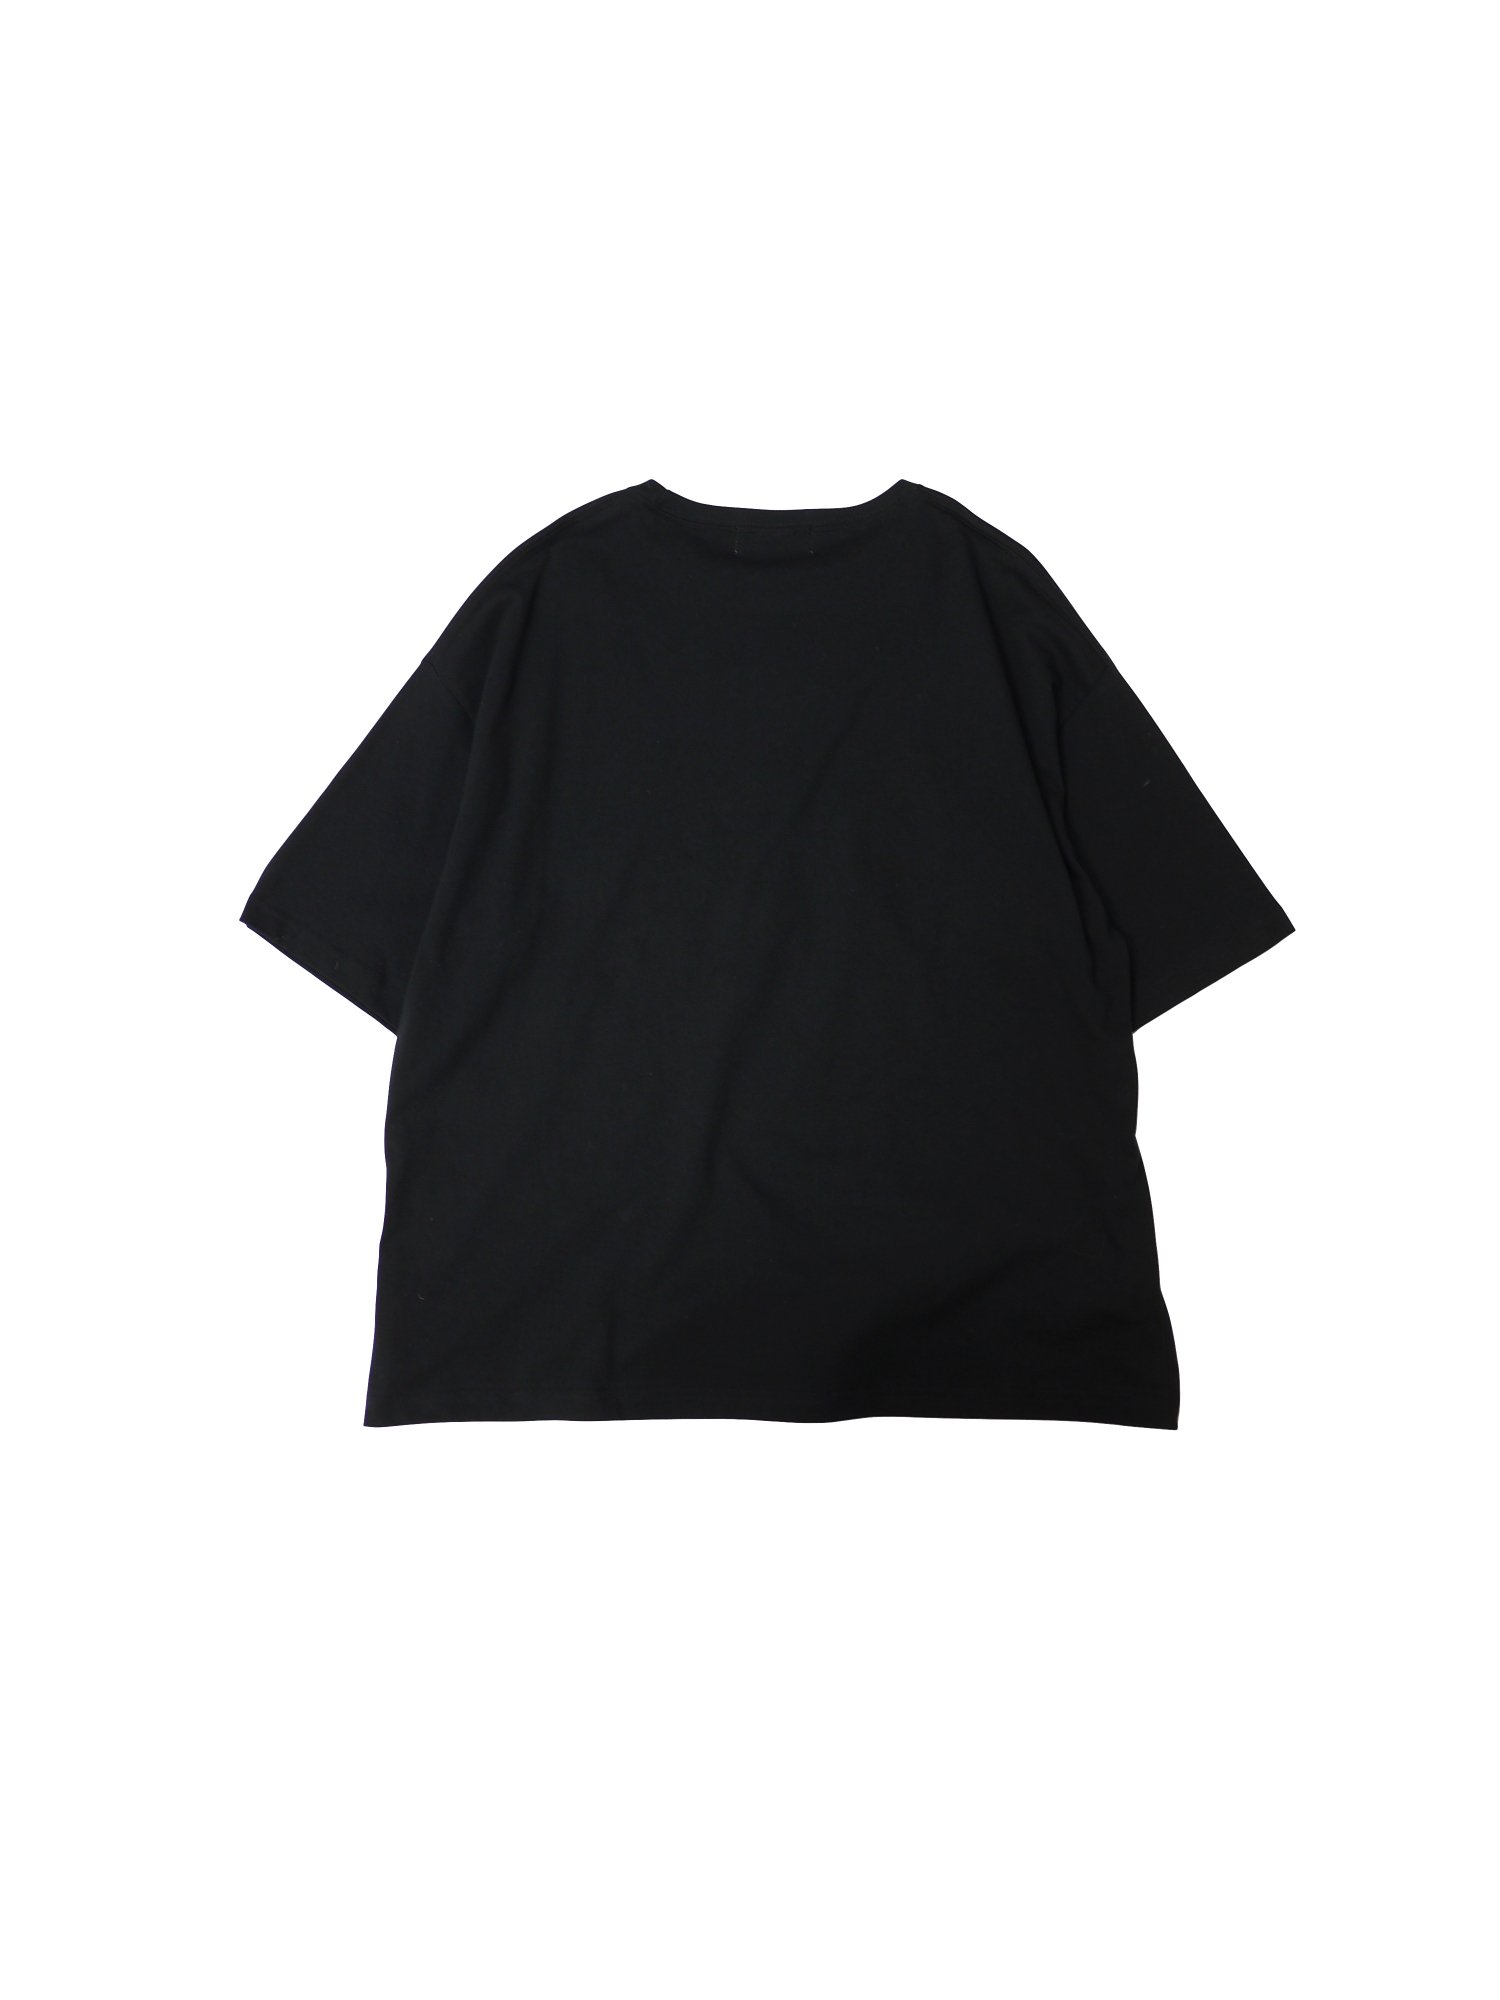 JieDa<br />CIRCLE TEE / BLACK<img class='new_mark_img2' src='https://img.shop-pro.jp/img/new/icons47.gif' style='border:none;display:inline;margin:0px;padding:0px;width:auto;' />